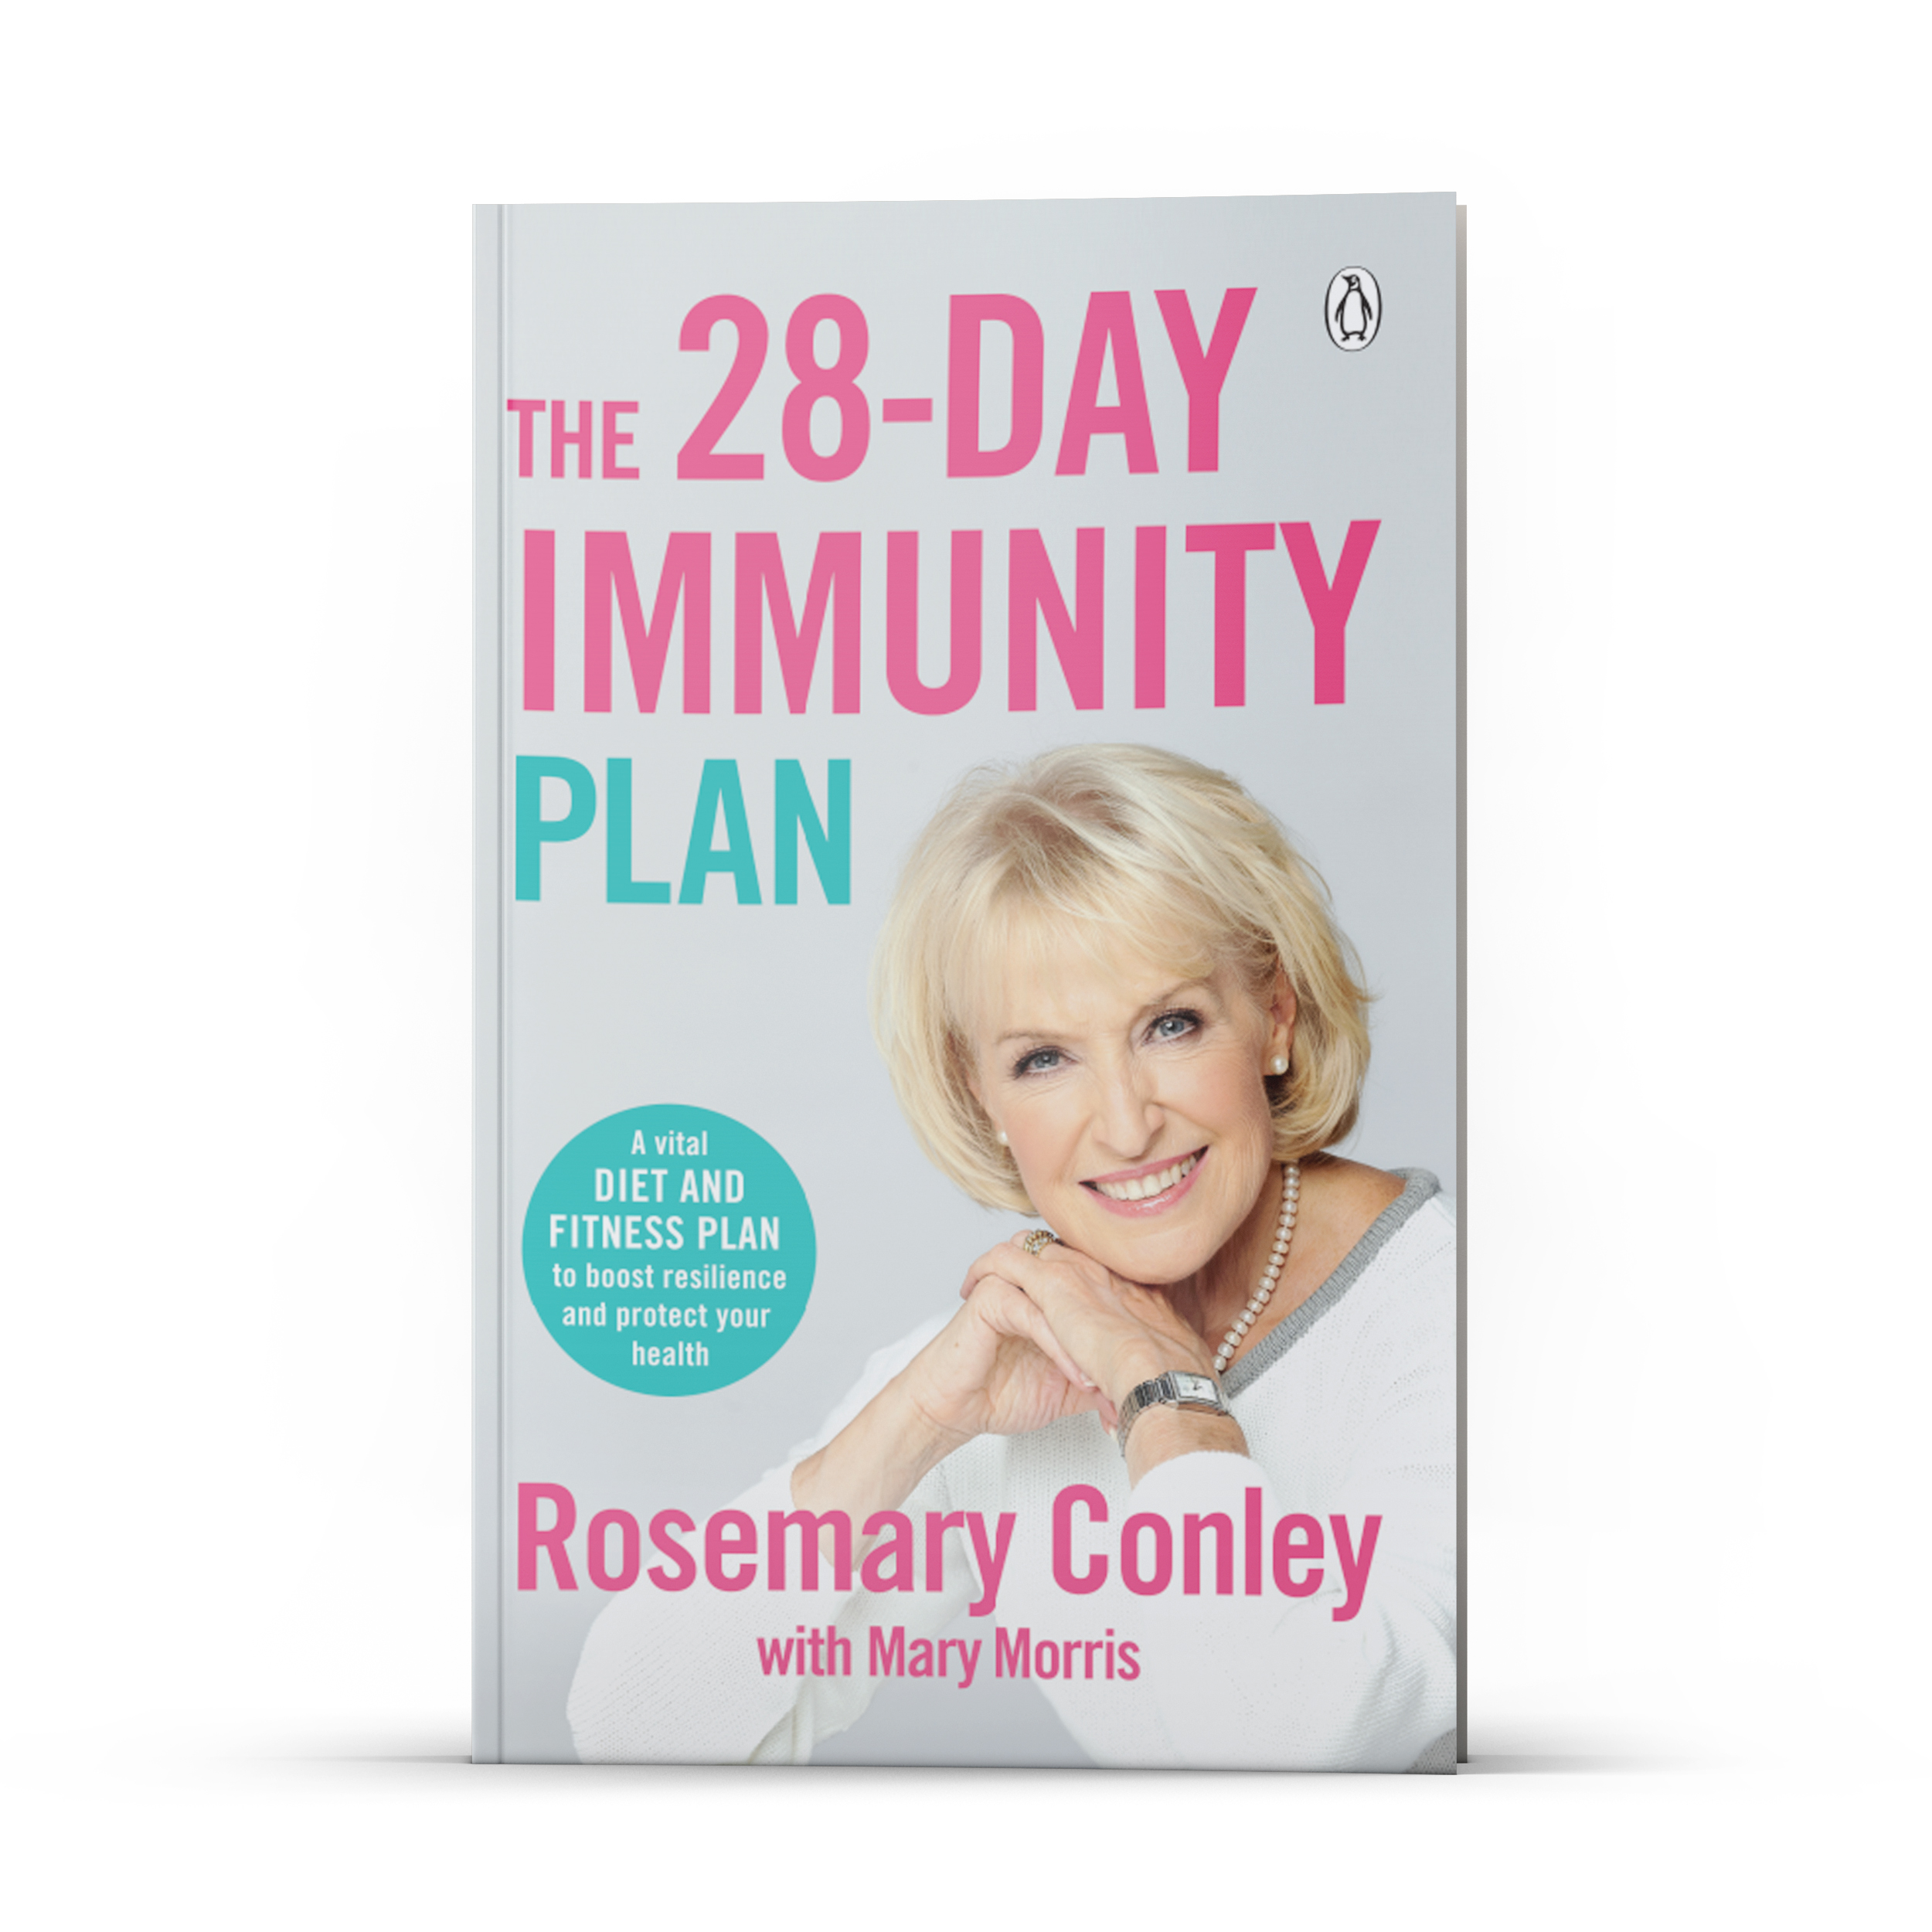 Front cover of the Rosemary Conley "The 28-Day Immunity Plan" paperback